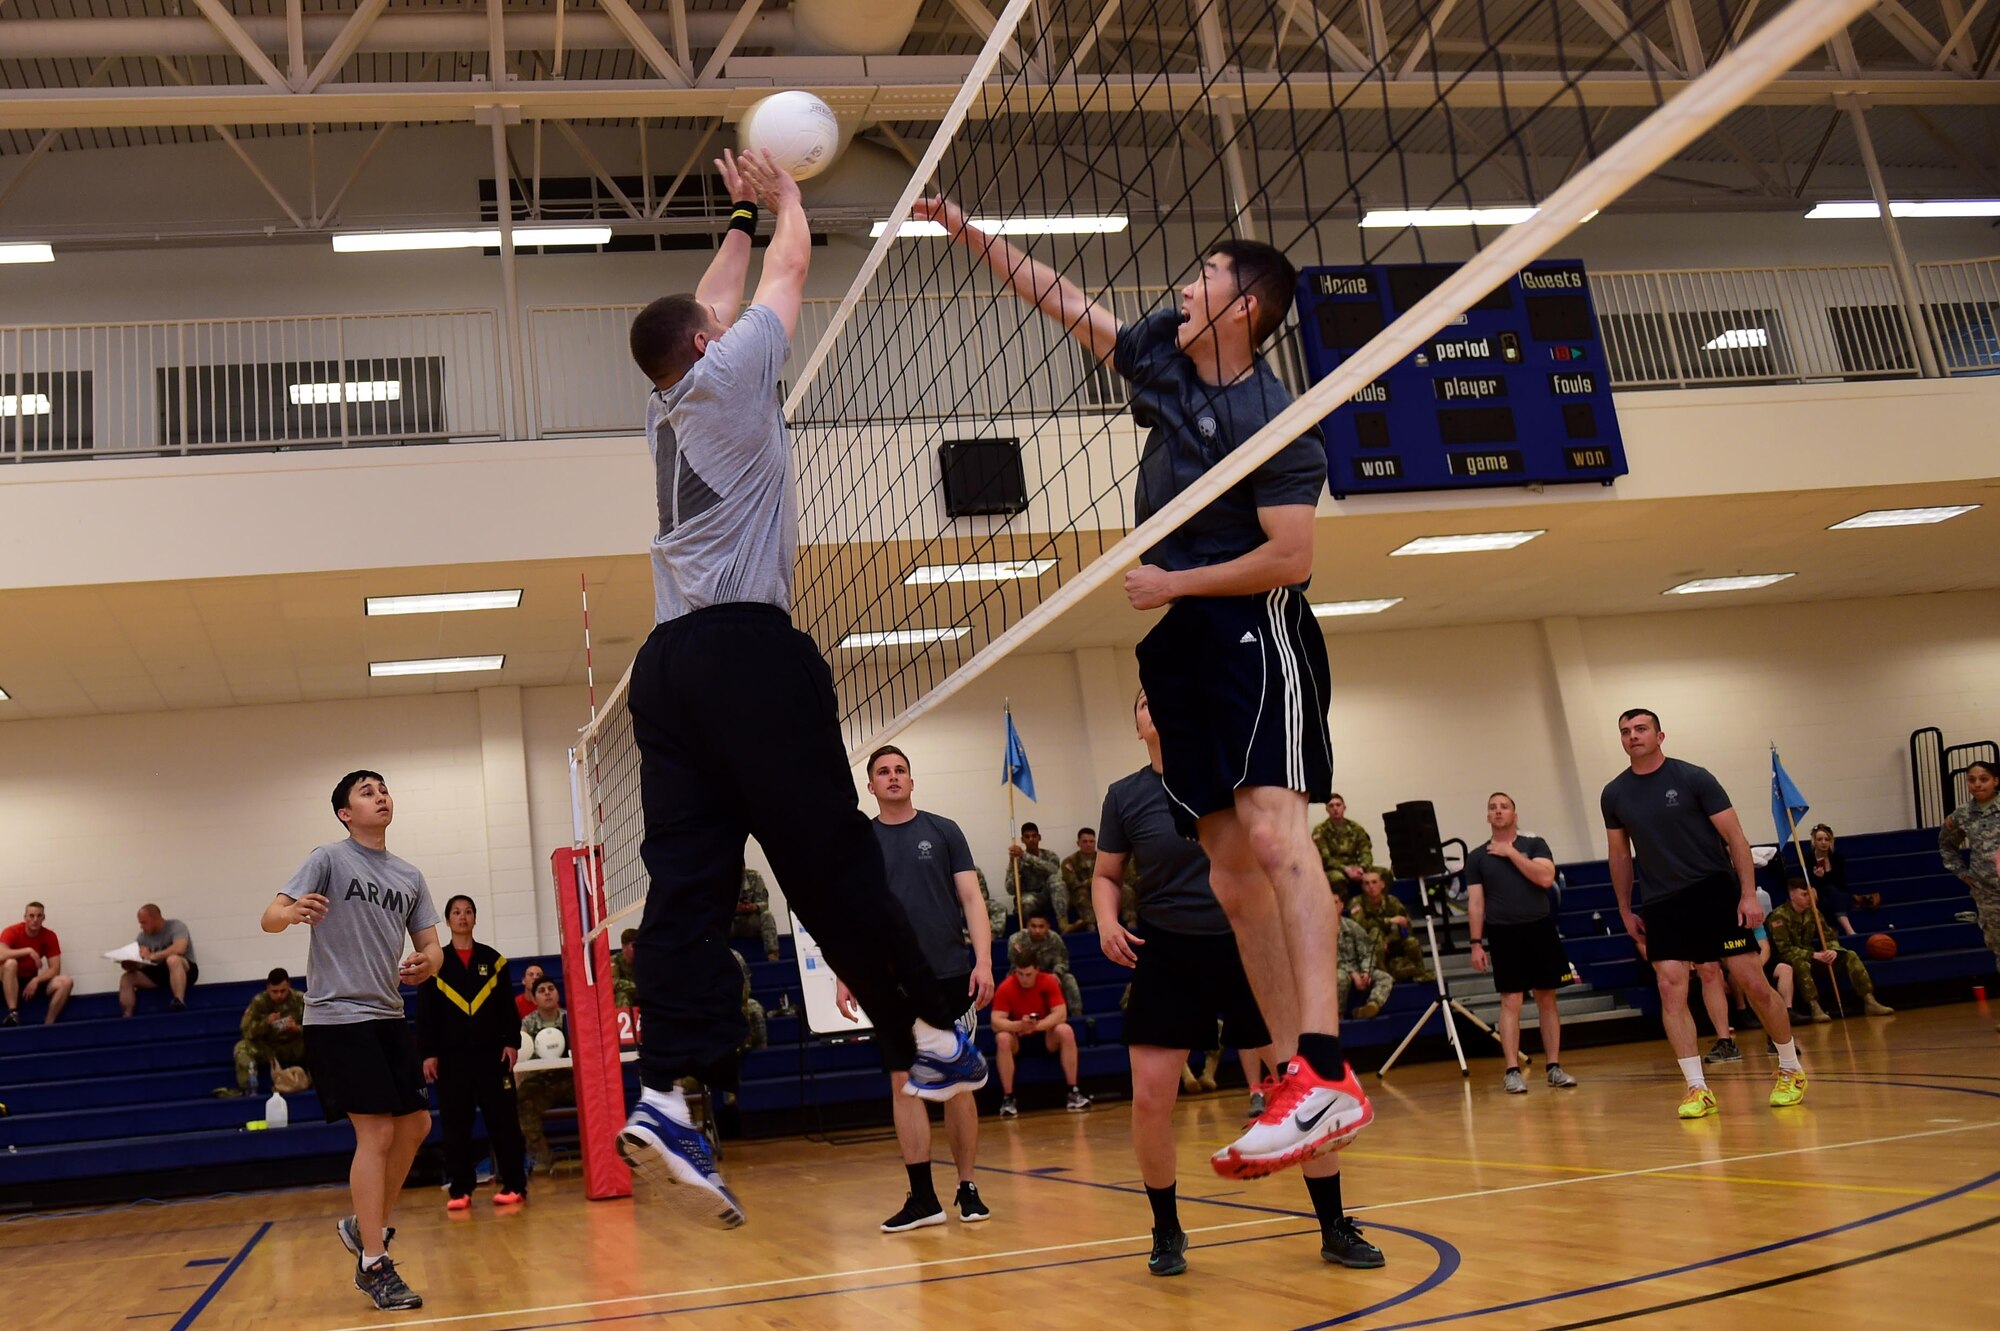 U.S. Army Spc. Howie Kim, 743d Military Intelligence Battalion signals analyst, blocks a spike by U.S. Army Sgt. David Perez, 743d Military Intelligence Battalion S3 training, April 27, 2016, at the Buckley Fitness Center on Buckley Air Force Base, Colo. The tournament consisted of three teams competing for two days with the winning team walking away with a trophy and bragging rights. (U.S. Air Force photo by Airman 1st Class Gabrielle Spradling/Released)